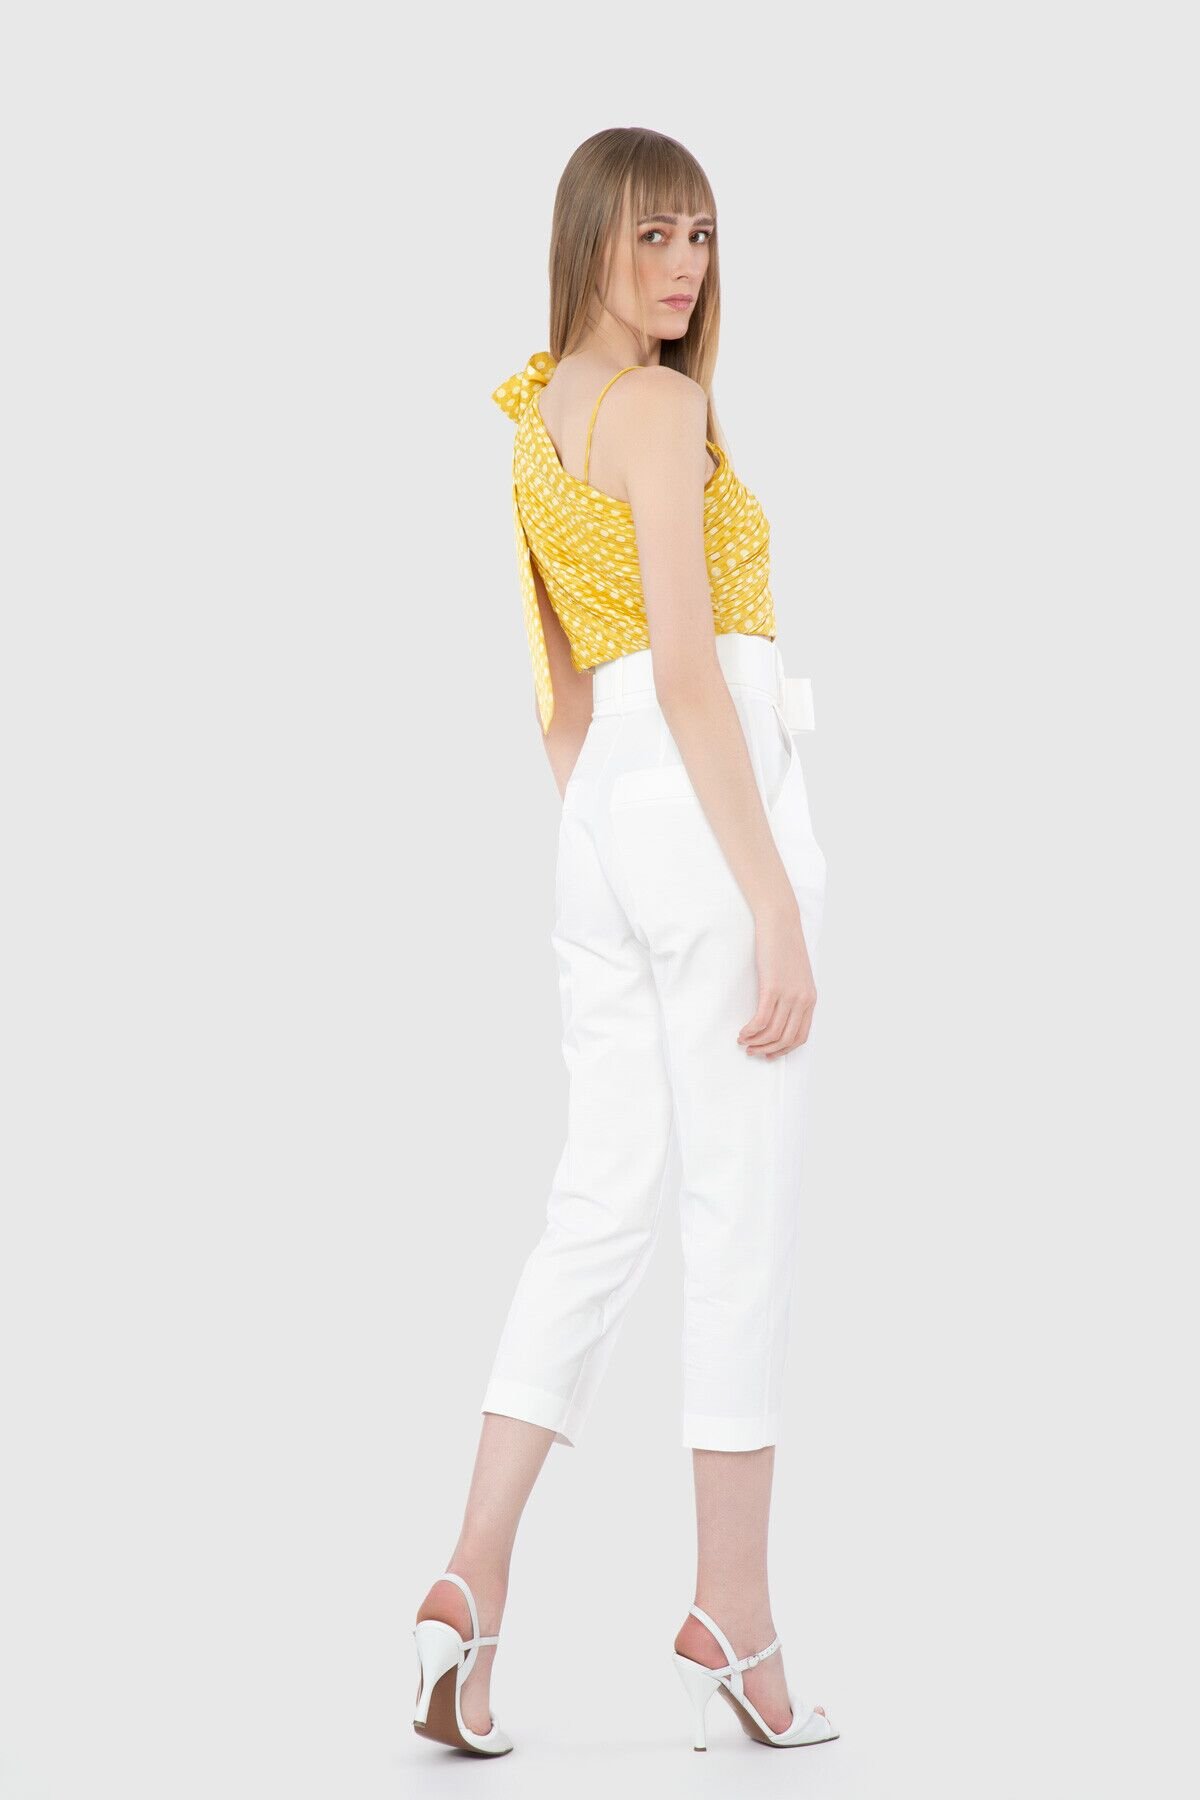 Shoulder Embroidery Detailed Pleated Yellow Blouse